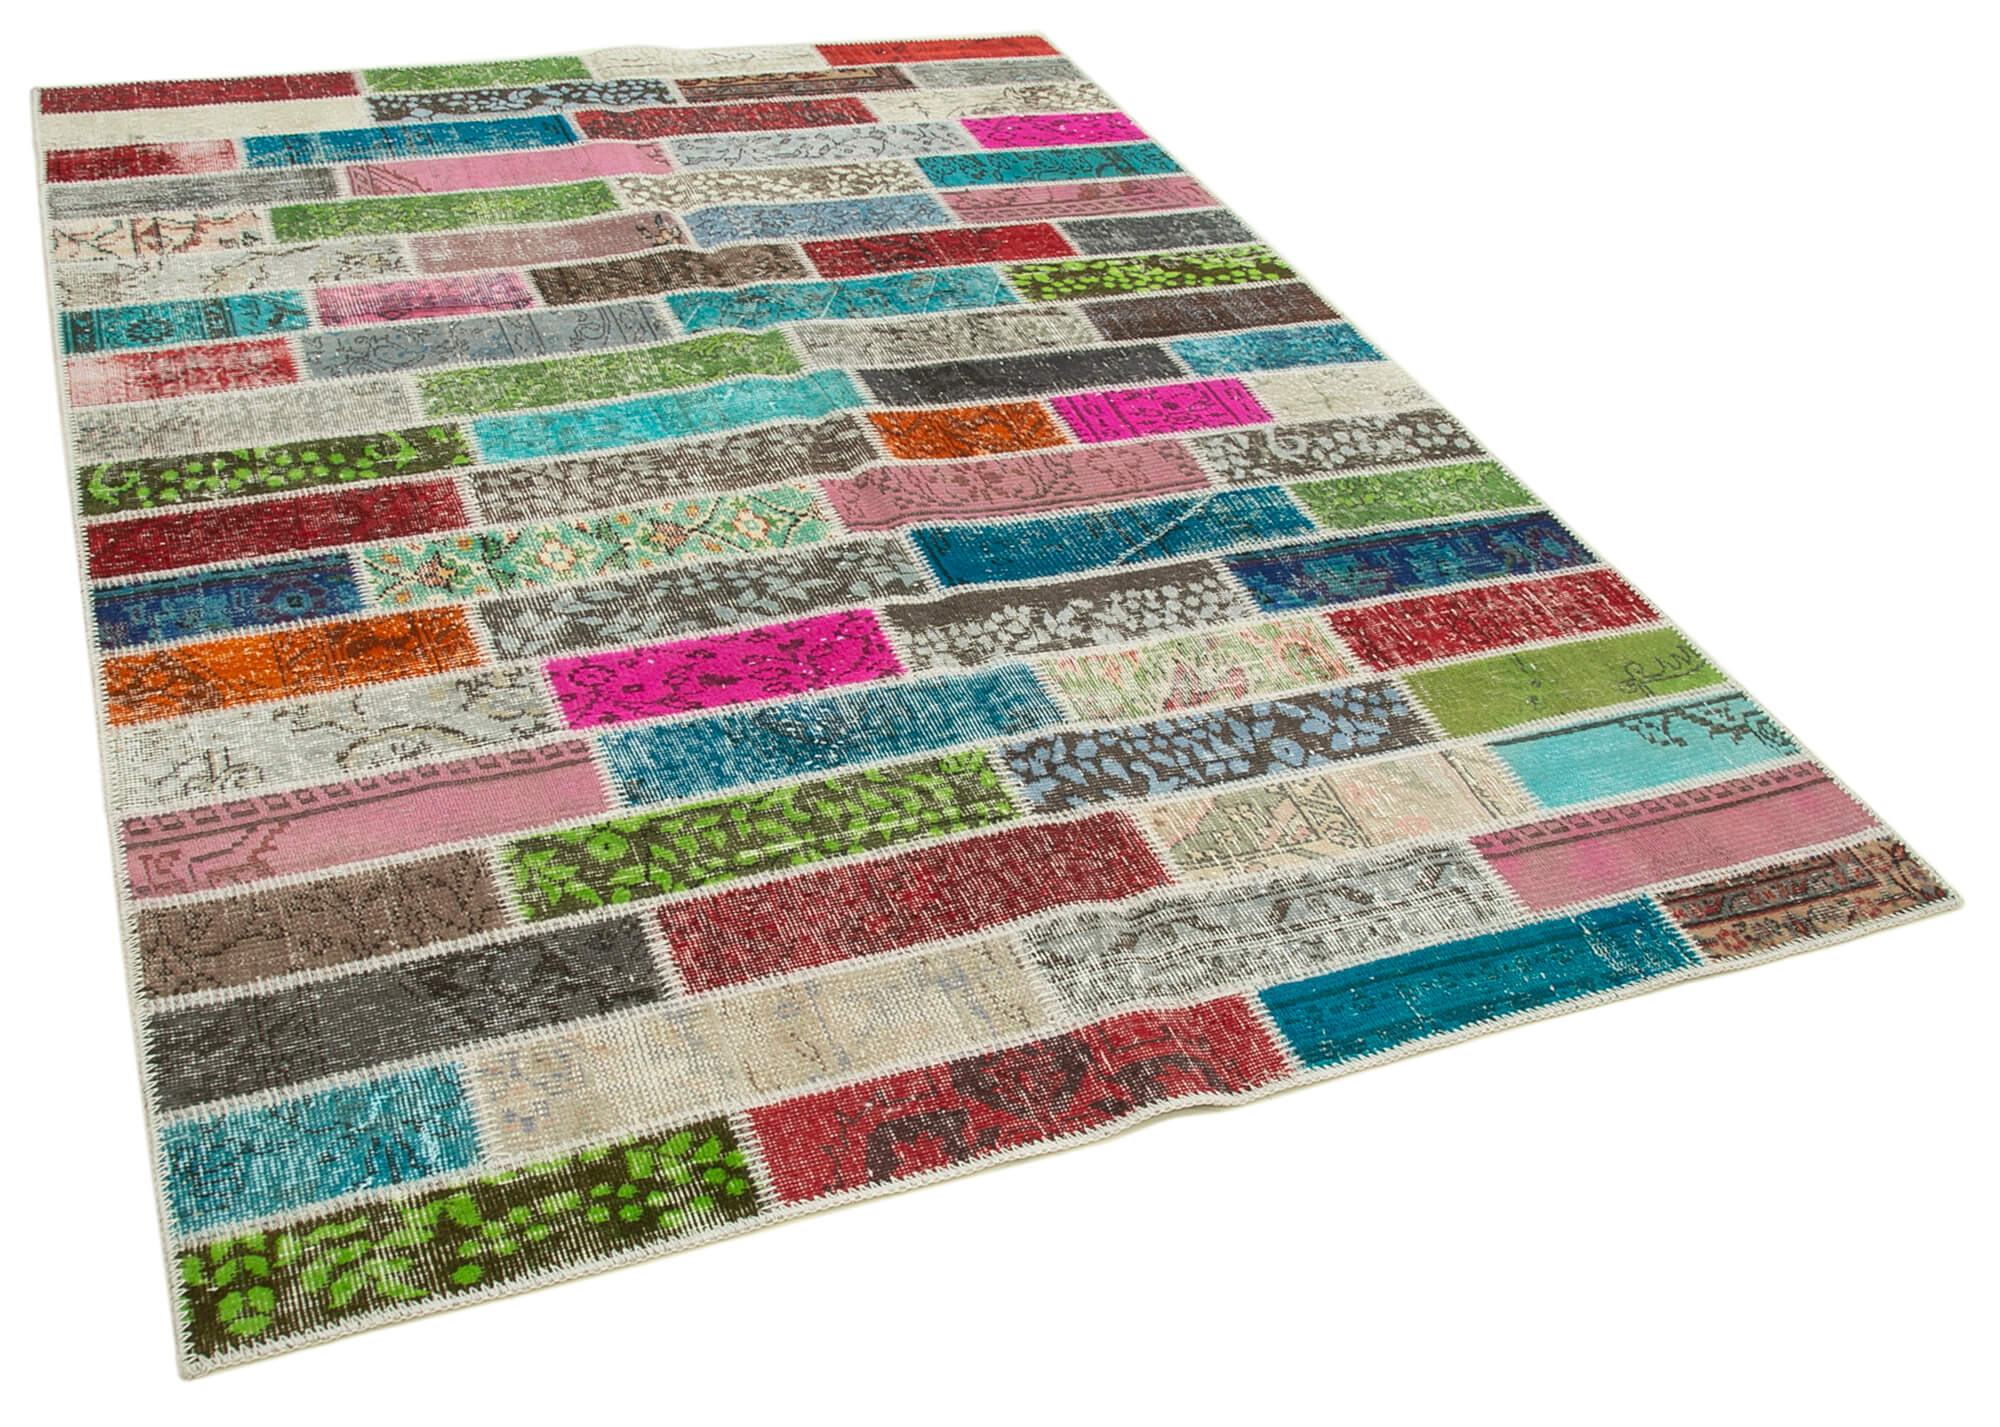 6x7 Multicolor Turkish Patchwork Small Area Rug -3236